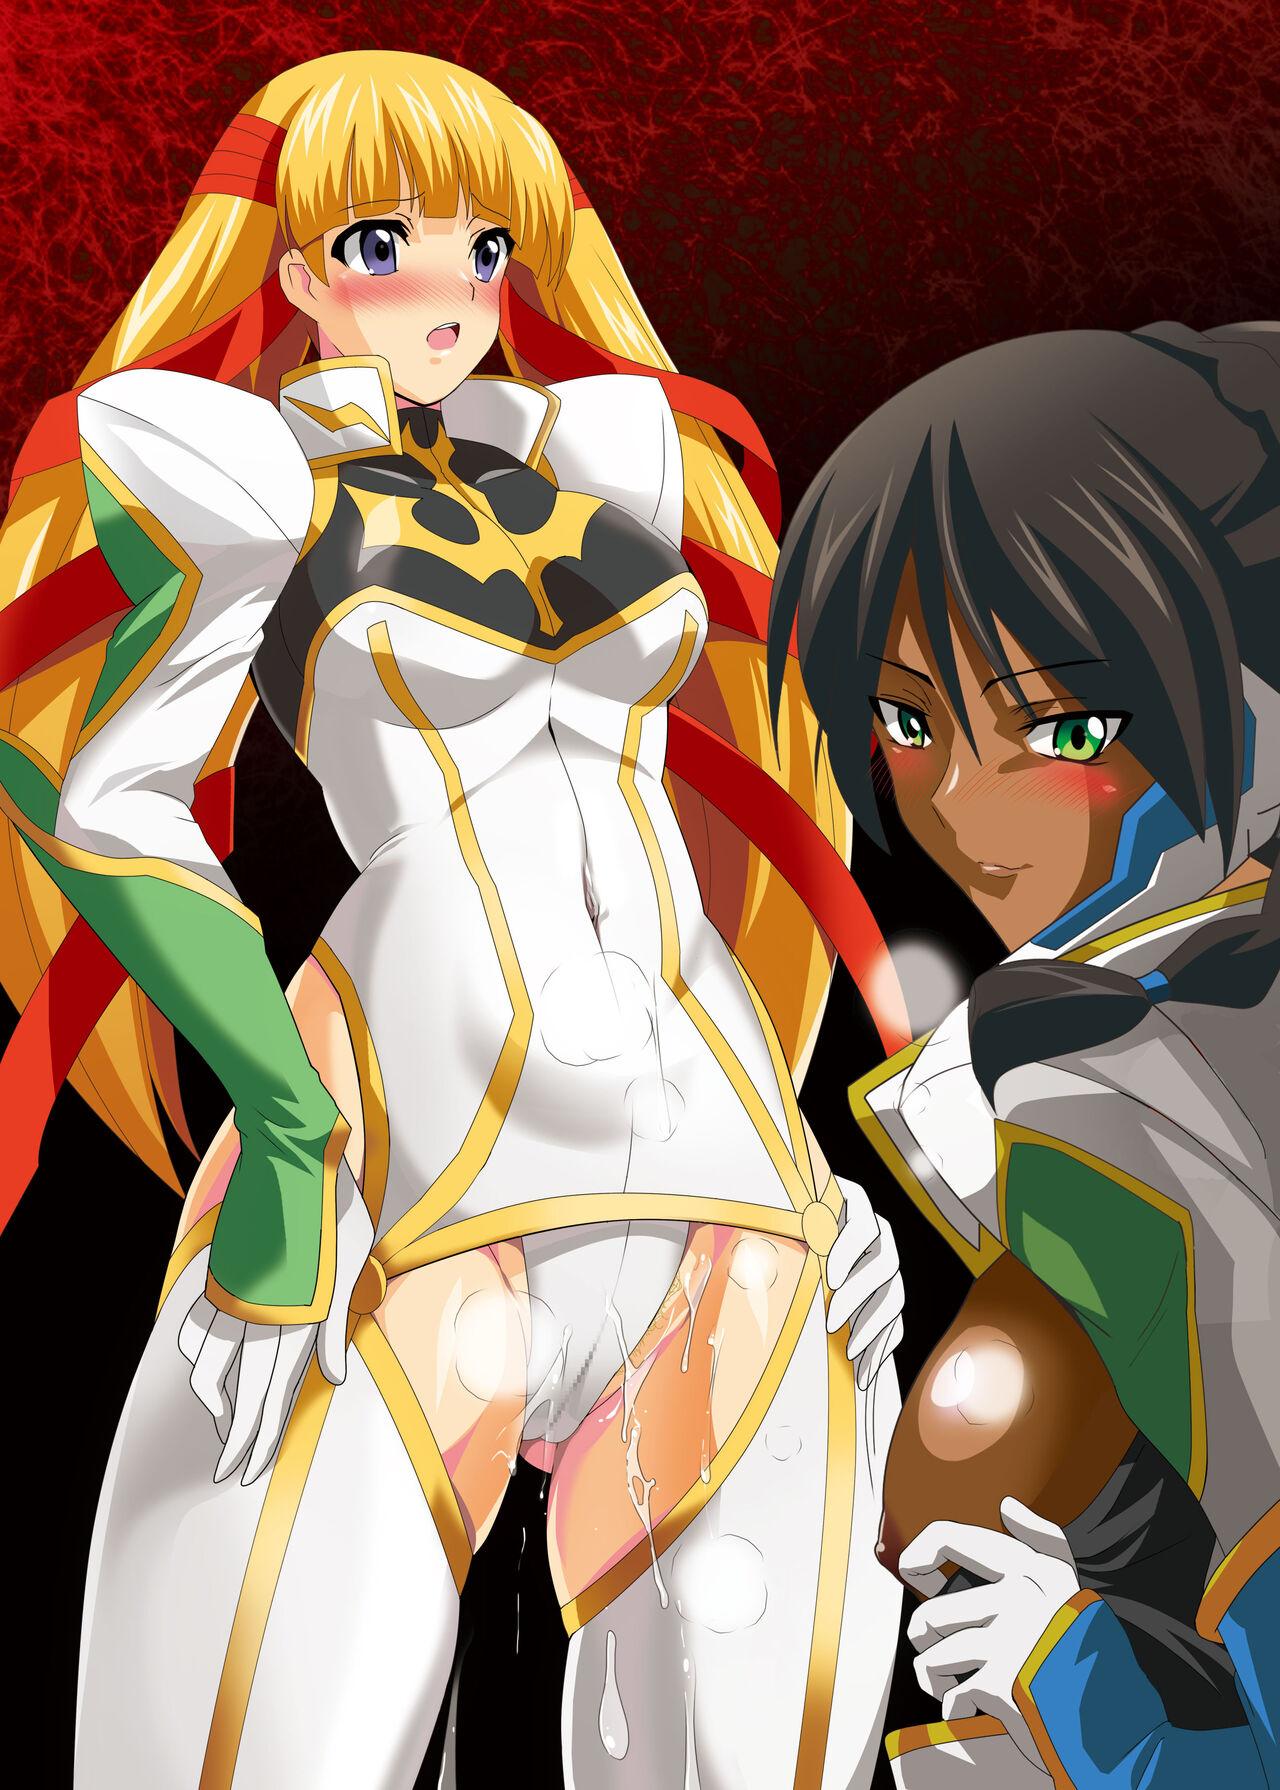 [Lezmoe! (Oyu no Kaori)]   [Brainwashing] Geass heroines completely corrupted by Empress Marianne [Evil fall] ~Knights, princesses, soldiers, and witches fall! (CODE GEASS: Lelouch of the Rebellion) 261